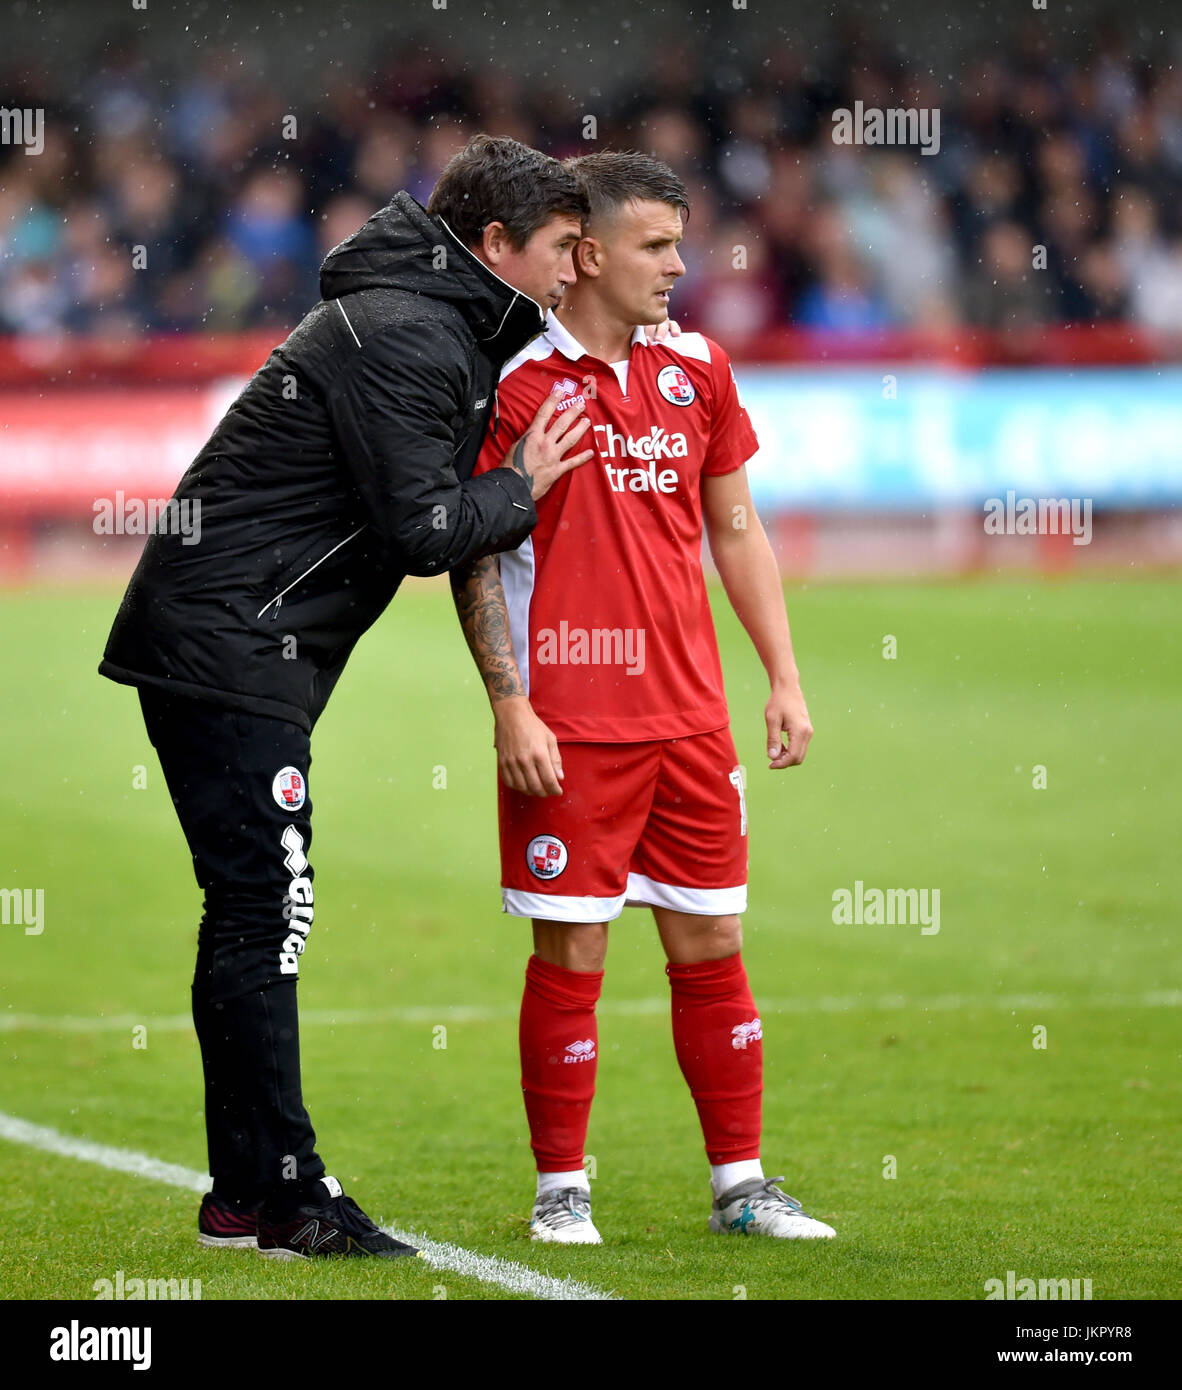 Crawley head coach Harry Kewell with player Dean Coxduring the pre season Friendly match between Crawley Town and Brighton and Hove Albion at the Checkatrade Stadium in Crawley. 22 Jul 2017 -Editorial Use Only Stock Photo